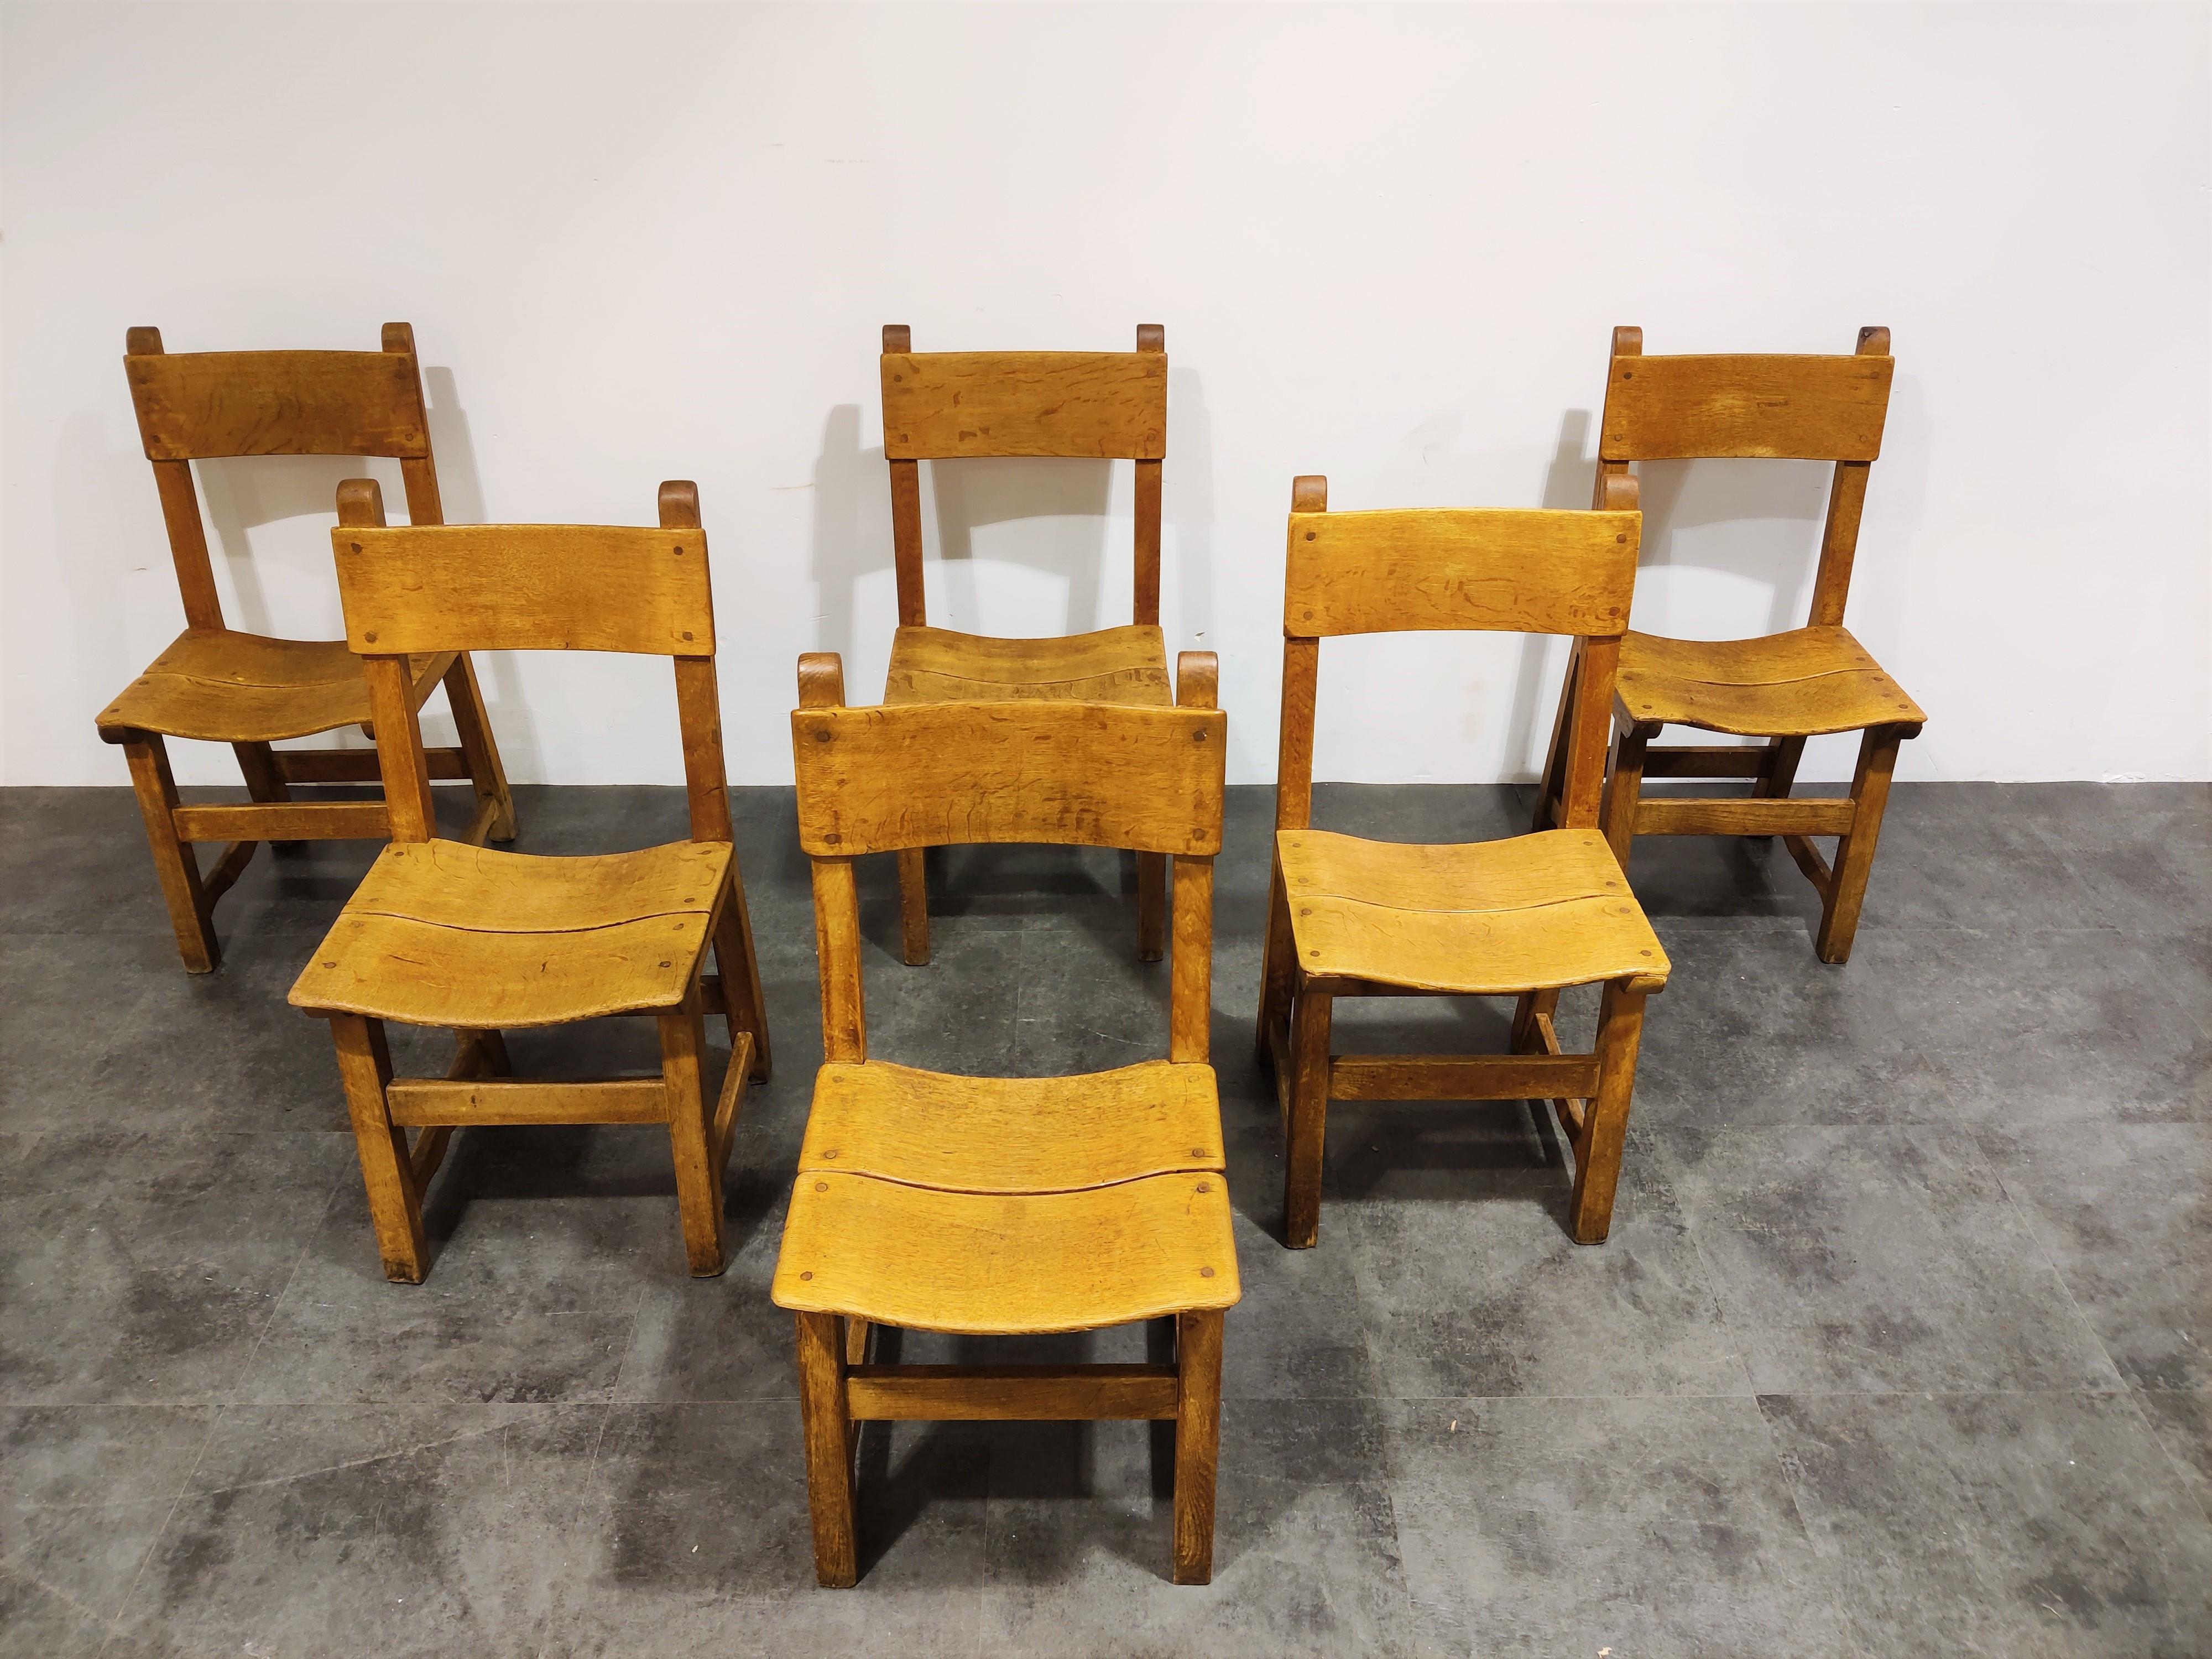 Rustic oak dining chairs with a brut design.

Slightly curved seat and backrest panels.

Good condition with normal age related wear.

Nice and sturdy.

1960s - France

Dimensions:
Height: 92cm/36.22